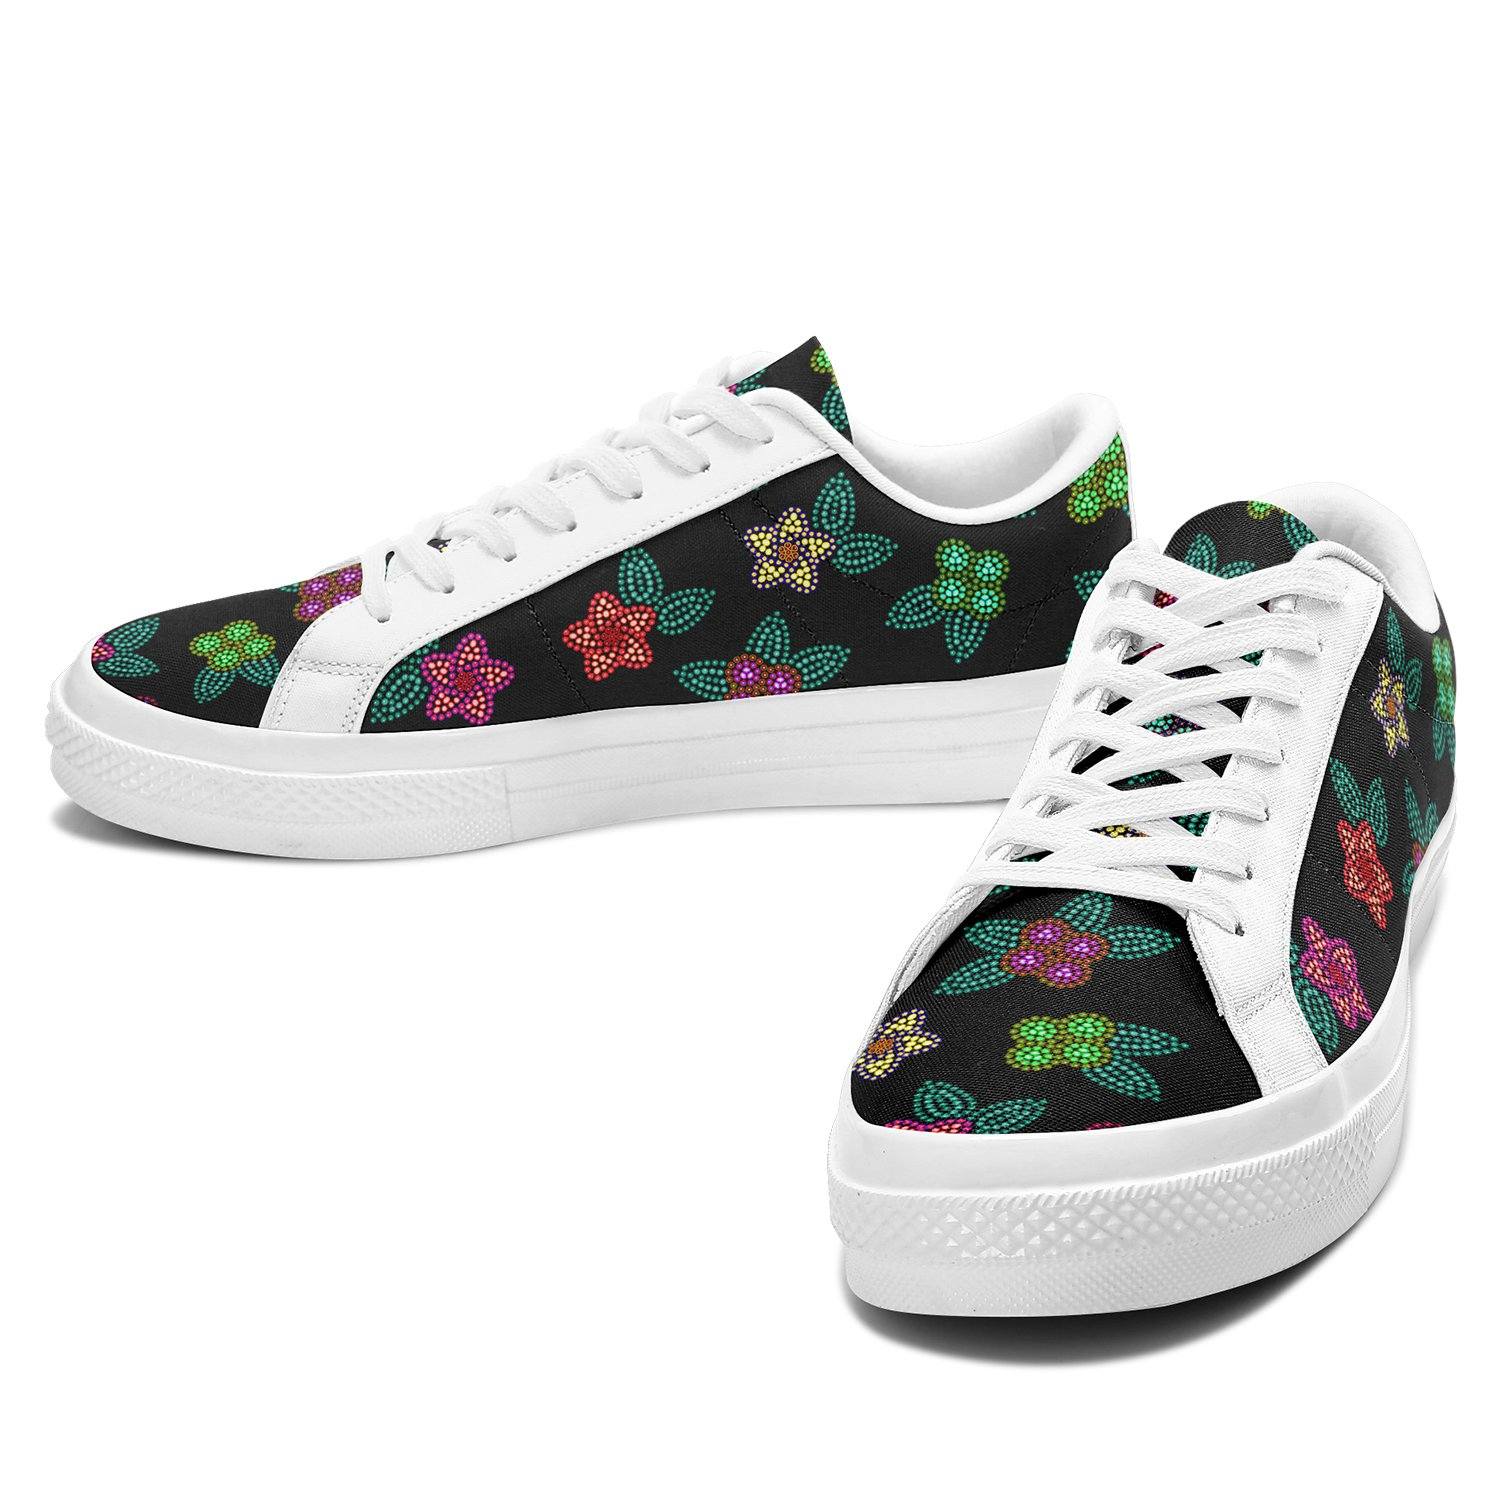 Berry Flowers Black Aapisi Low Top Canvas Shoes White Sole aapisi Herman 